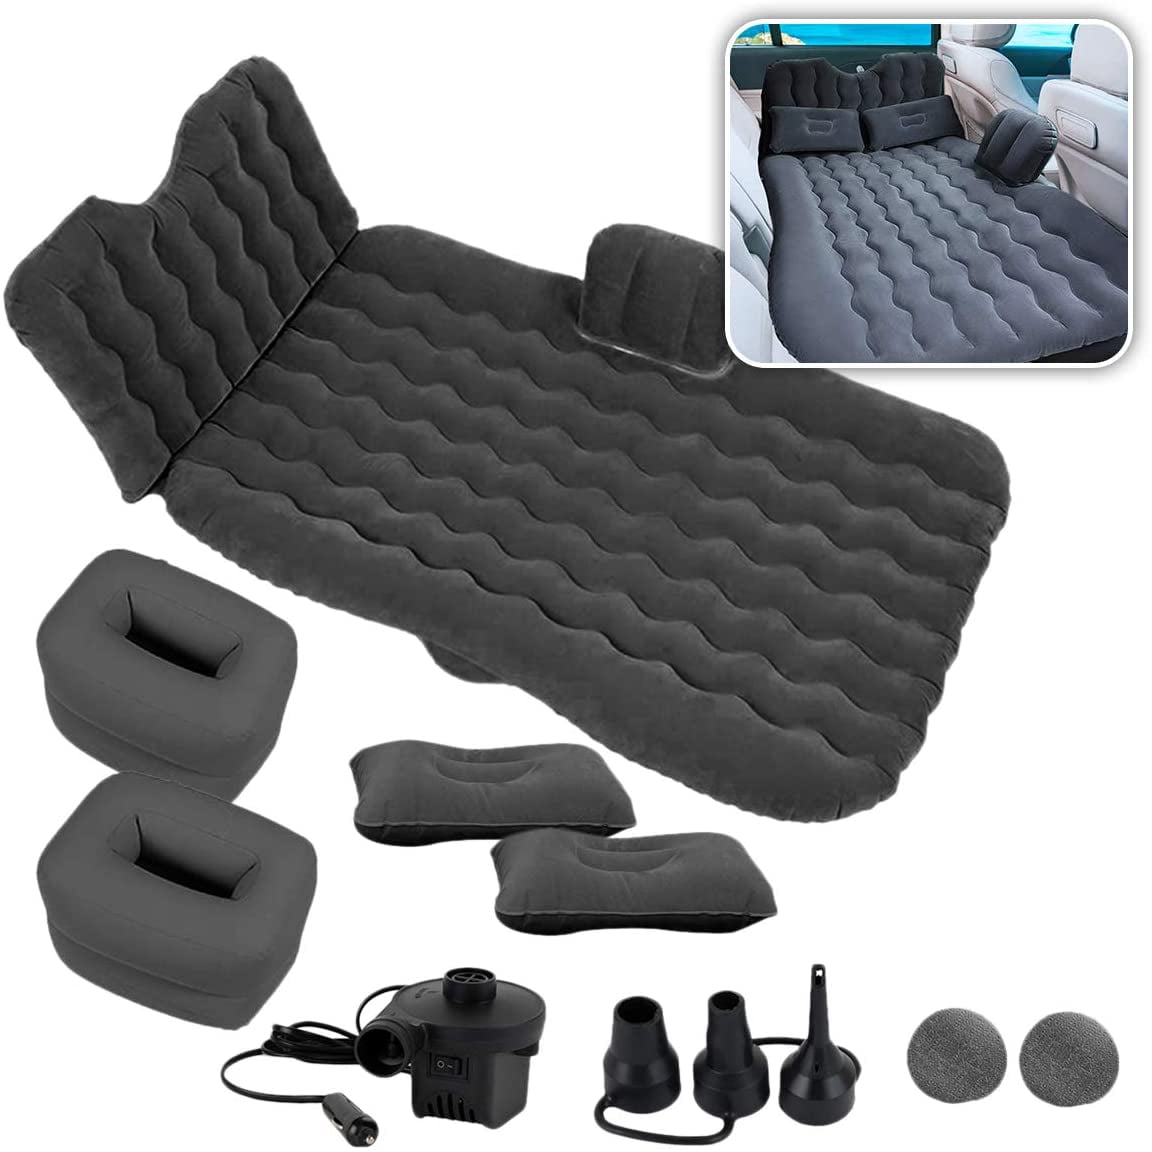 Inflatable Air Bed Car SUV Travel Mattress Back Seat Camping with Pump &2 Pillow 